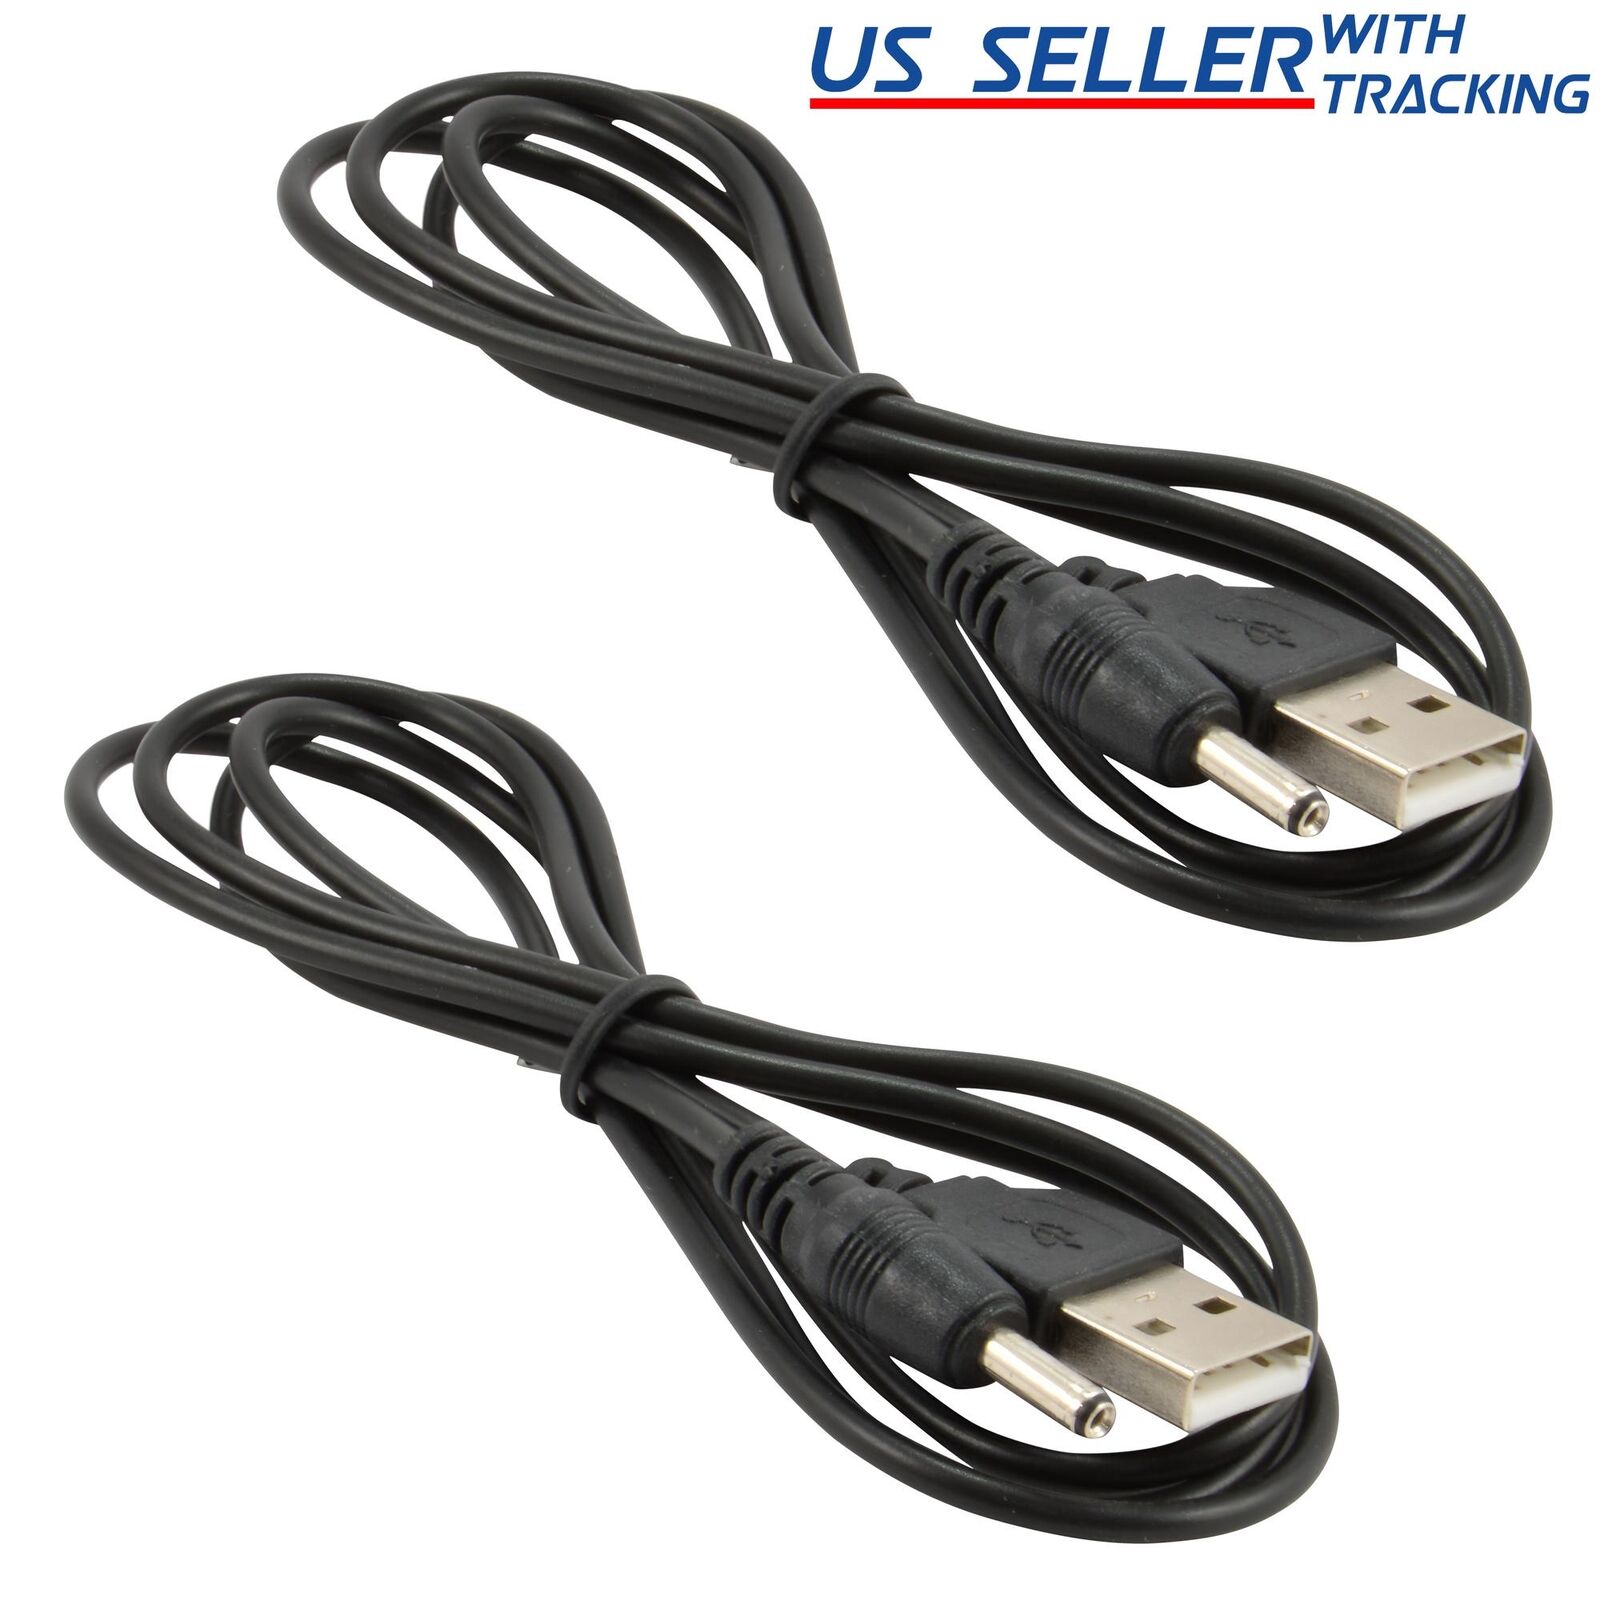 2pcs USB to 3.5mm x 1.35mm Barrel Connector 5V DC Power Cable Jack Male, 5ft